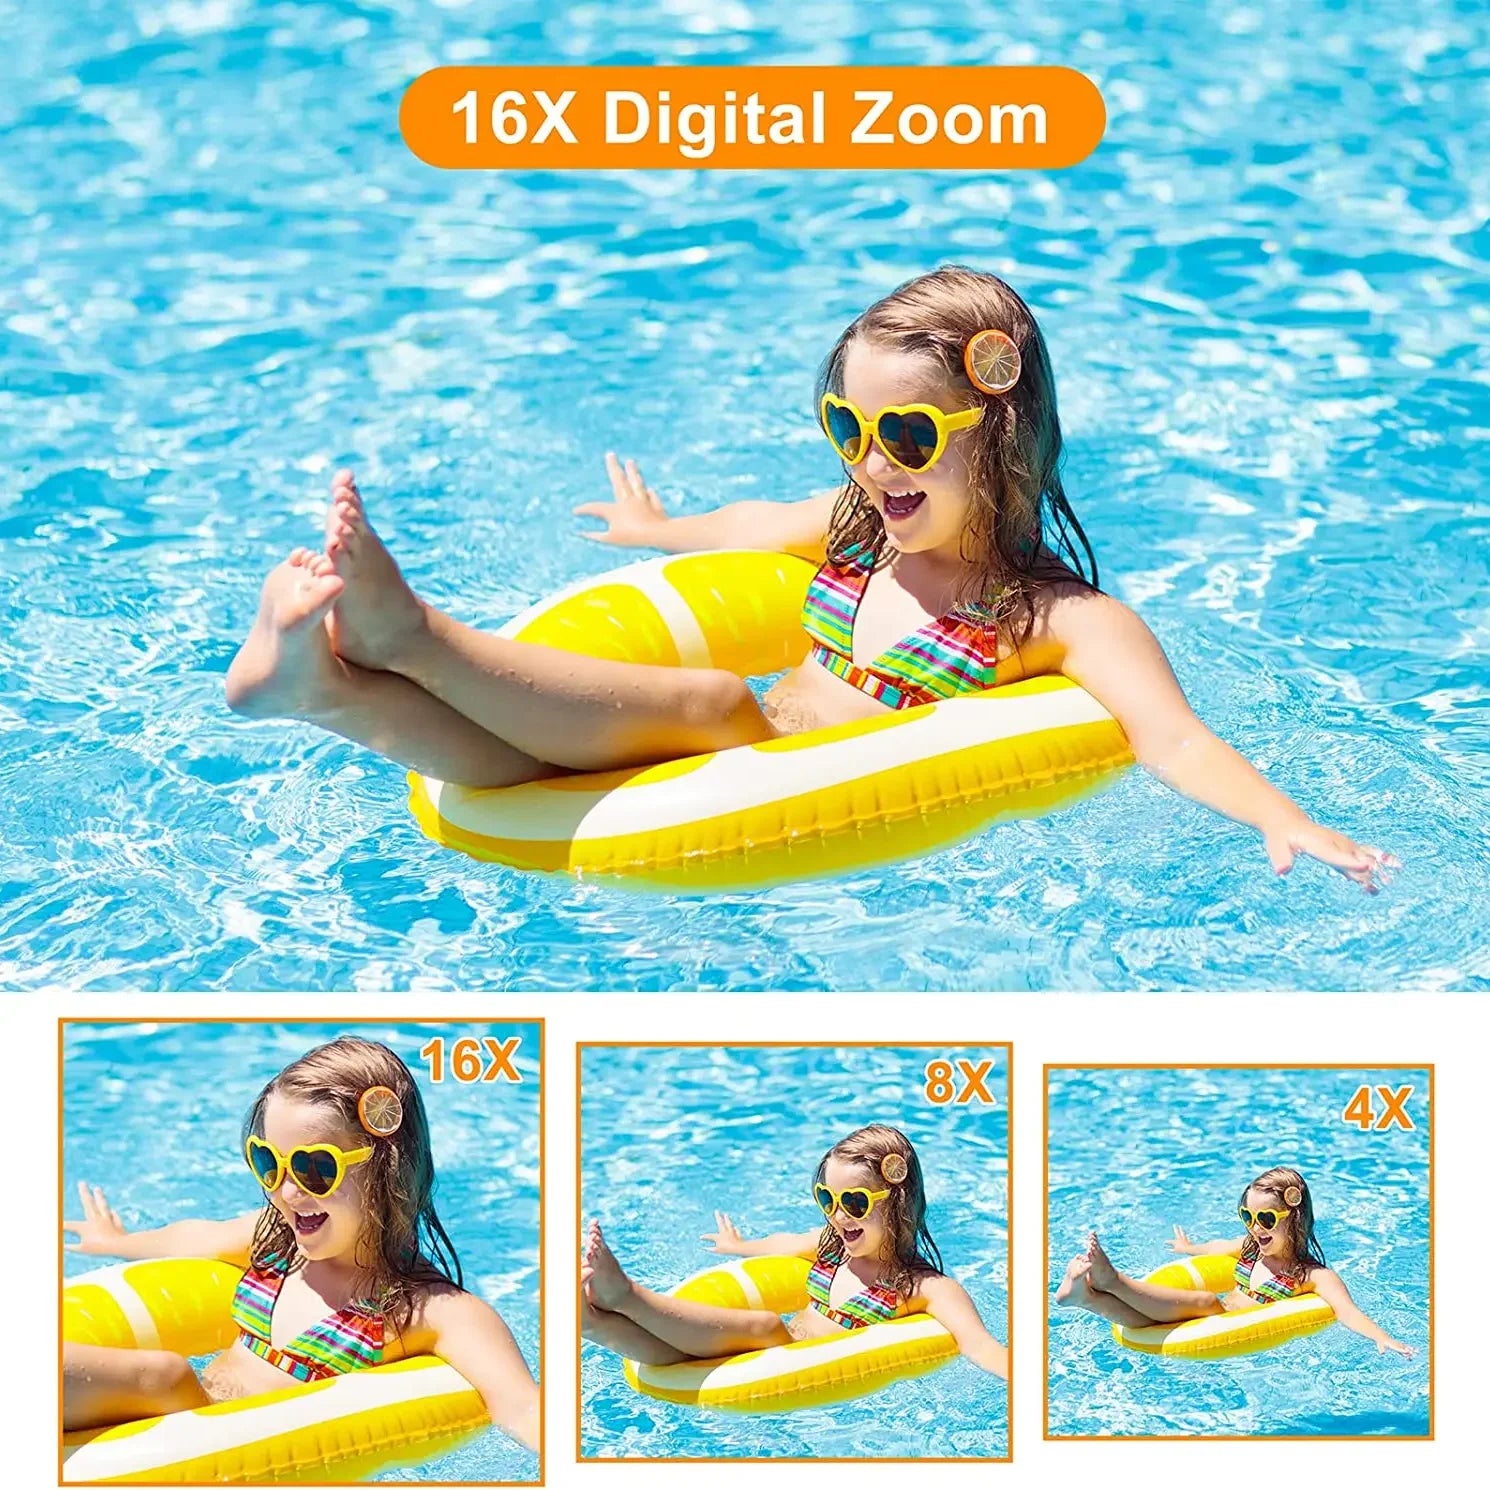 HD 2.4 Inches 1080P Digital Camera Rechargeable Cameras with 16X Zoom Compact Camera 44MP Cameras for Kids Girls Camera Digit